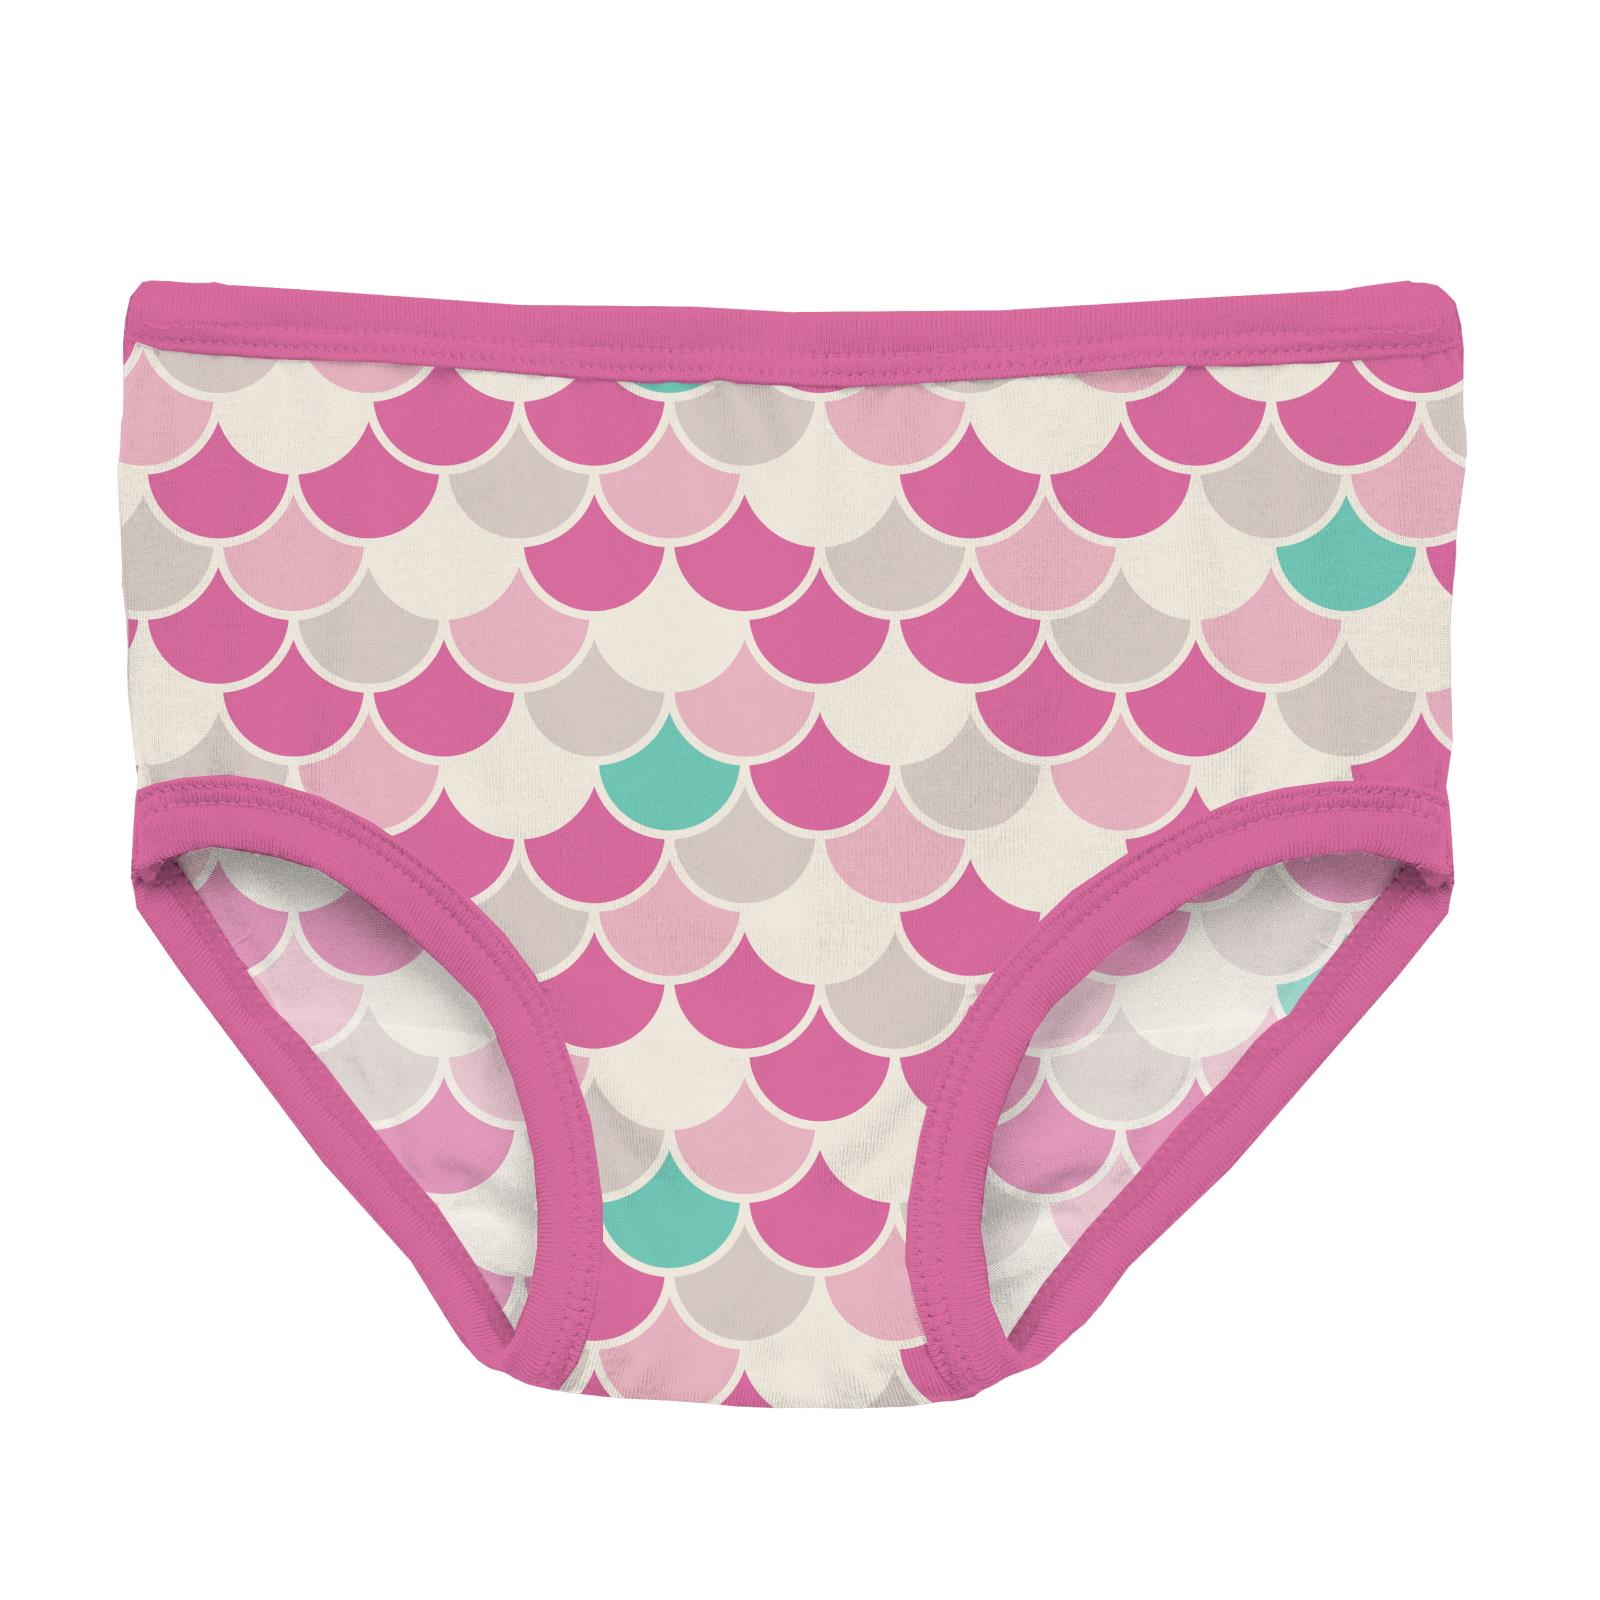 Kickee Pants Girl Underwear (Set of 2), Raisin Grape Vines & Wine Grapes  Herbs - Size 3T/4T - The Red Willow